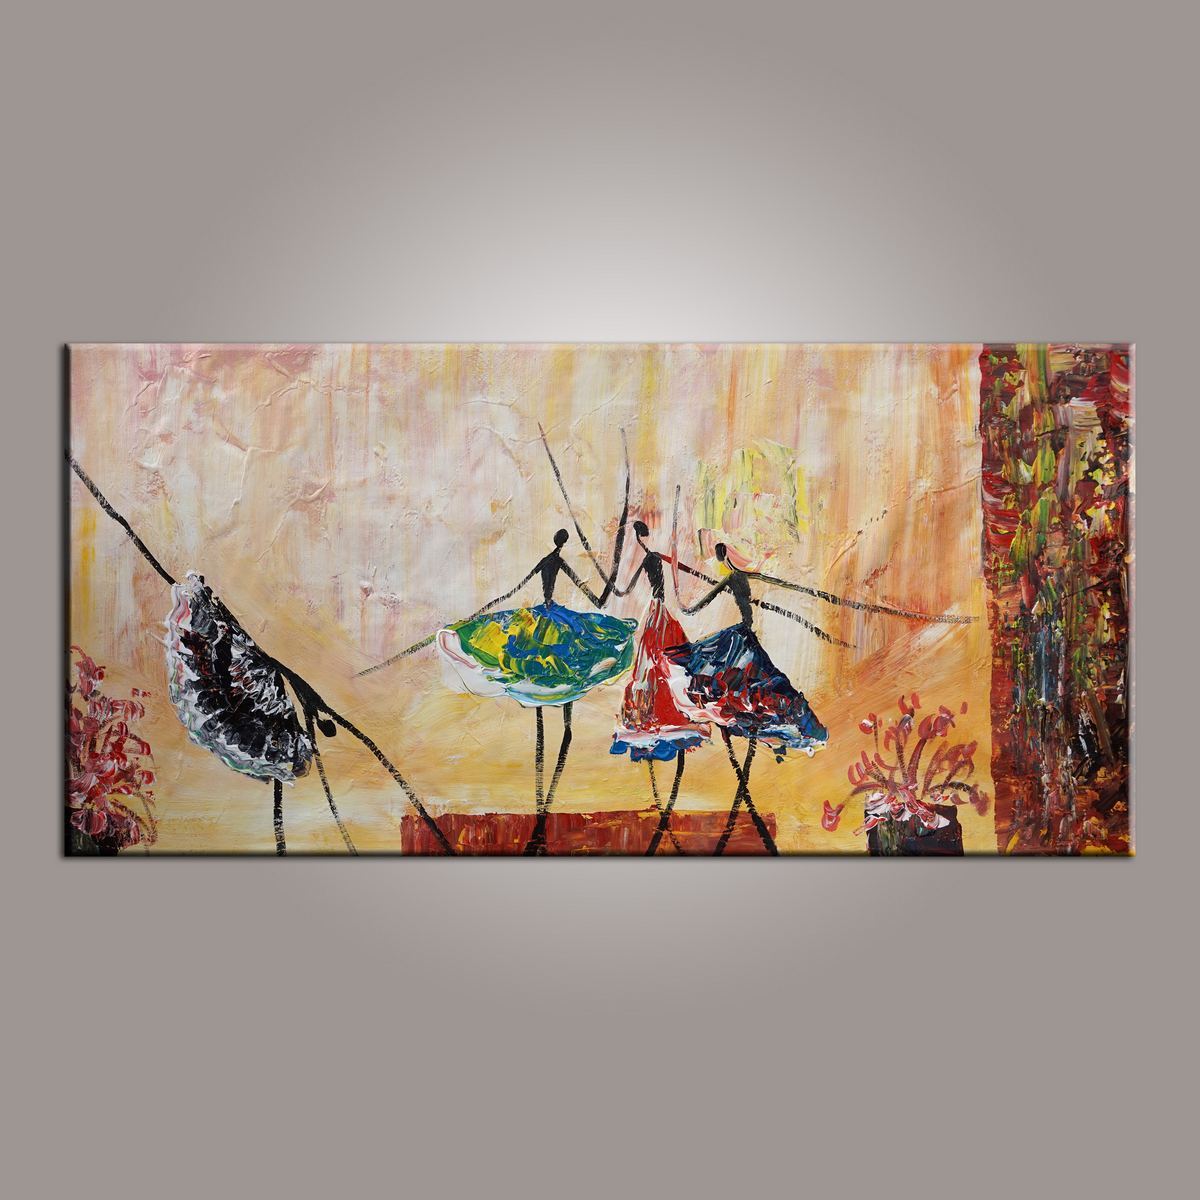 Canvas Painting, Large Art, Ballet Dancer Art, Abstract Painting, Abstract Art, Wall Art, Wall Hanging, Bedroom Wall Art, Modern Art, Painting for Sale-Grace Painting Crafts